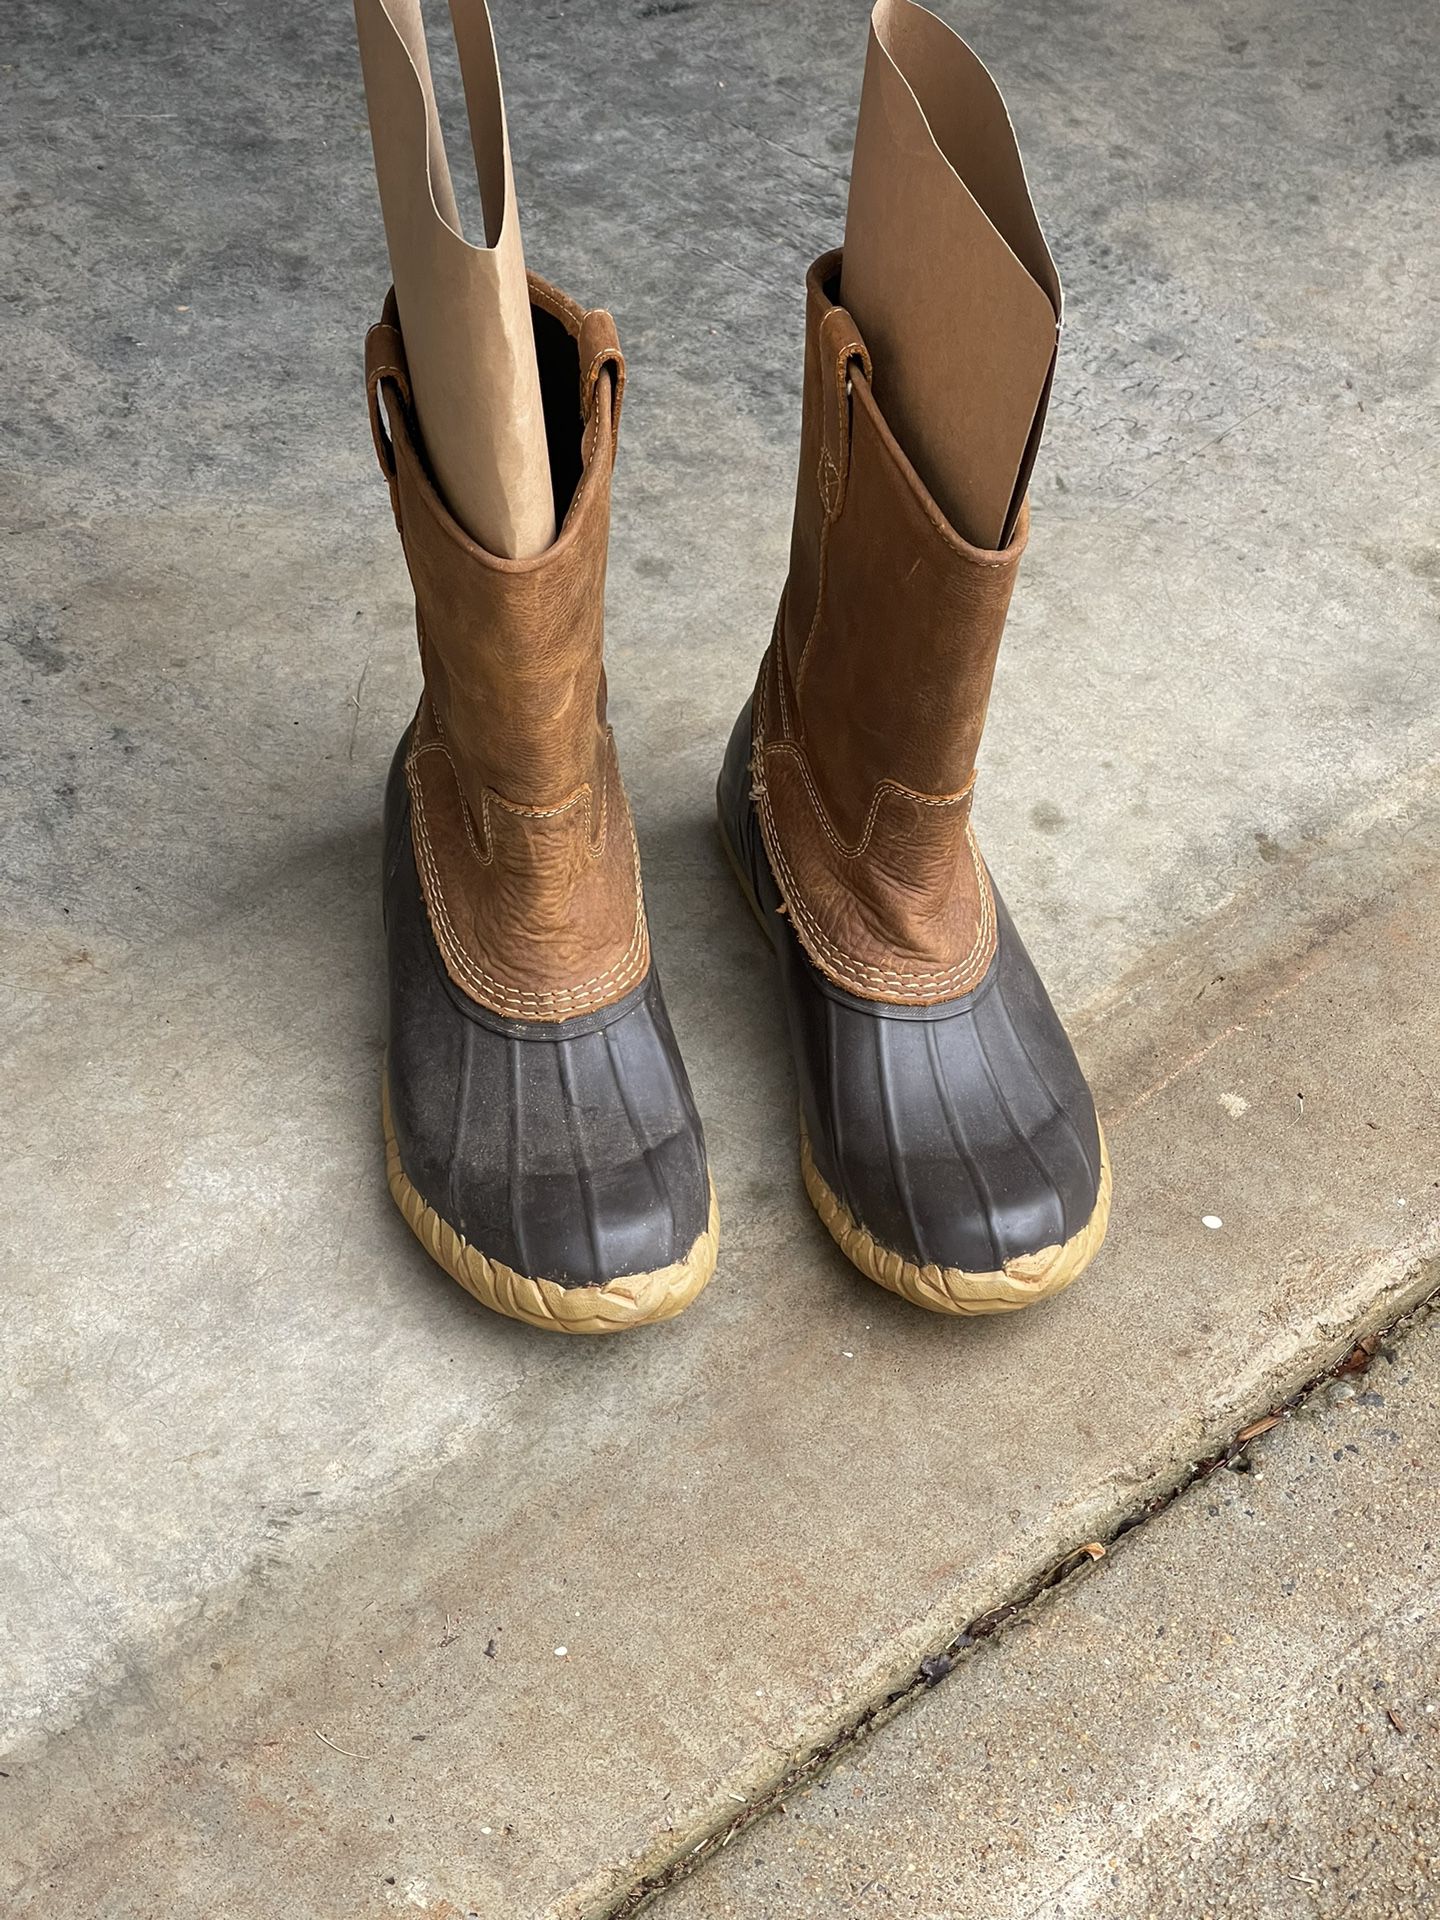 georgia boot waterproof number 11 are new